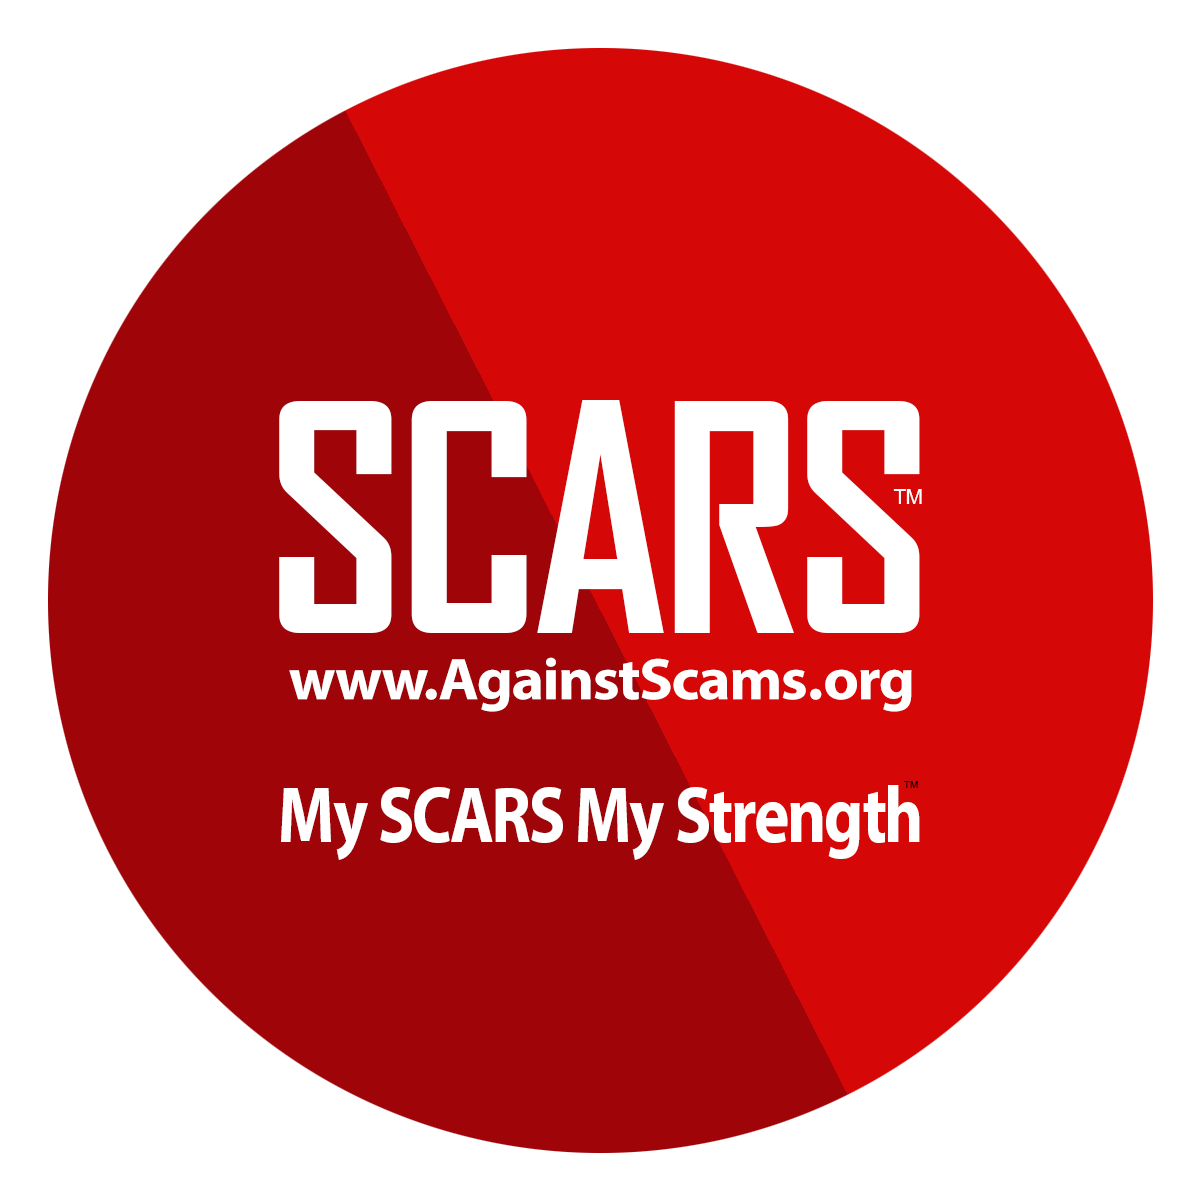 SCARS the Society of Citizens Against Relationship Scams Inc.